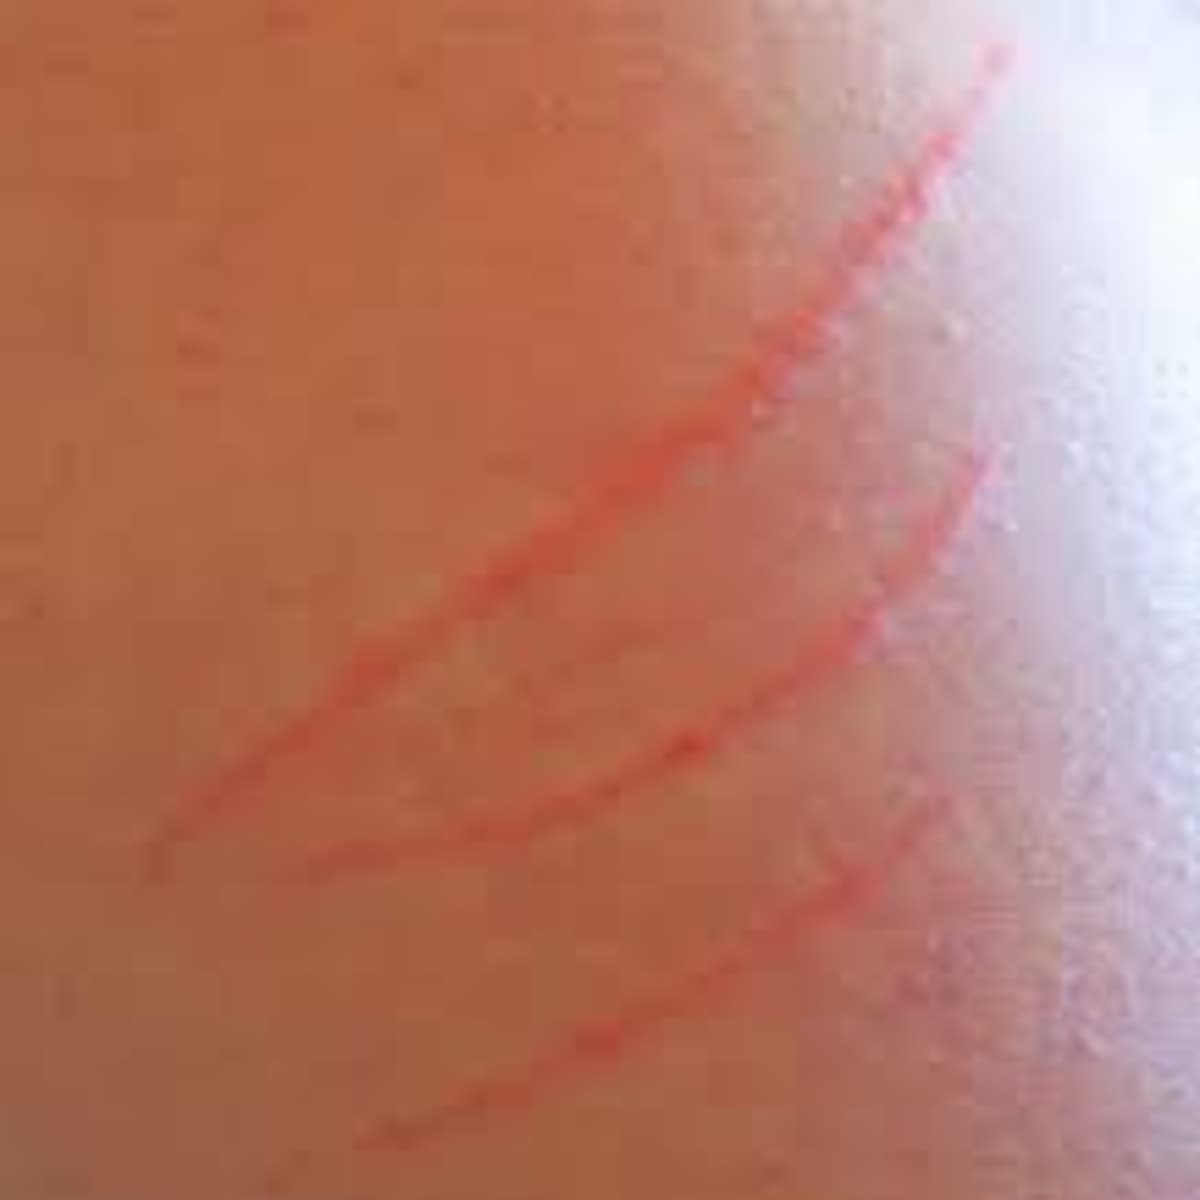 Mysterious Demonic Scratches Explained- What do these scratches on my body  mean? (With Photos and Video) - HubPages